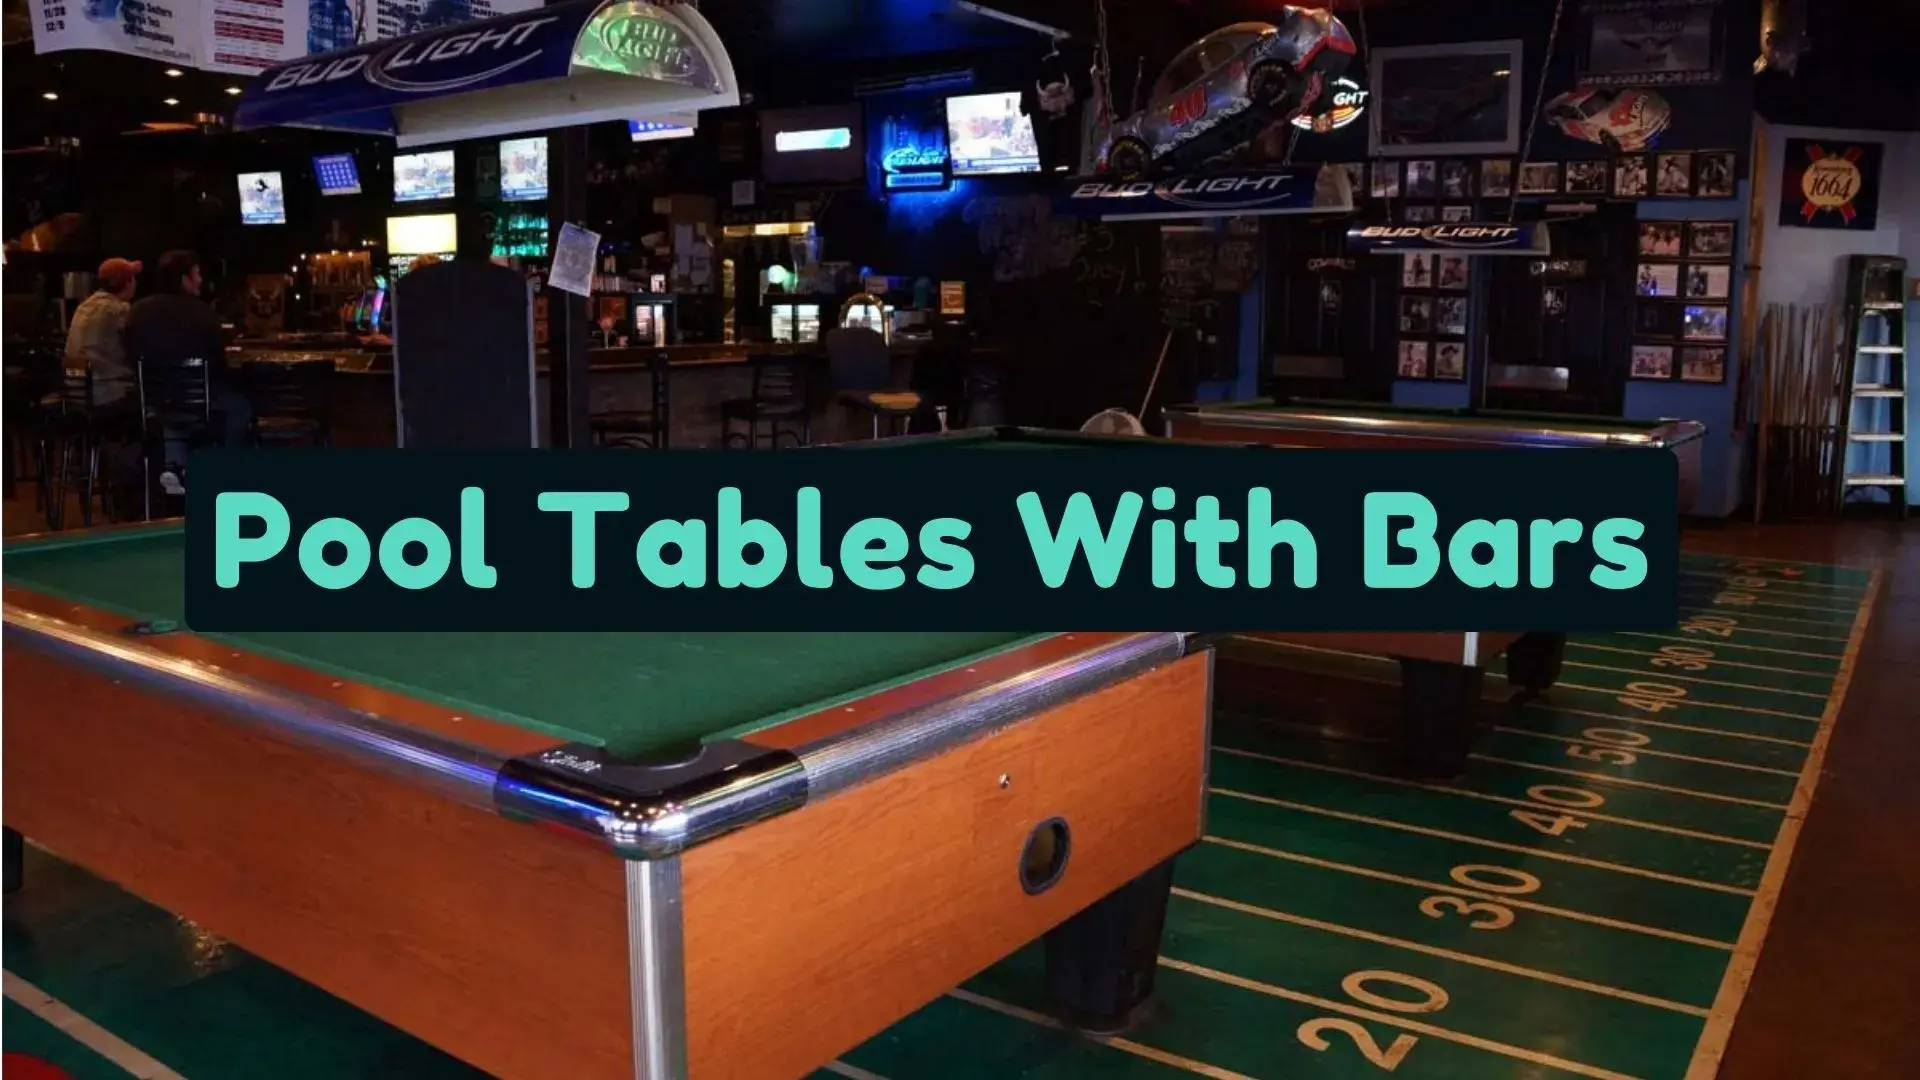 Bars With Pool Tables Near Me [ Billiards, Pools, Restaurant – Open Now ]